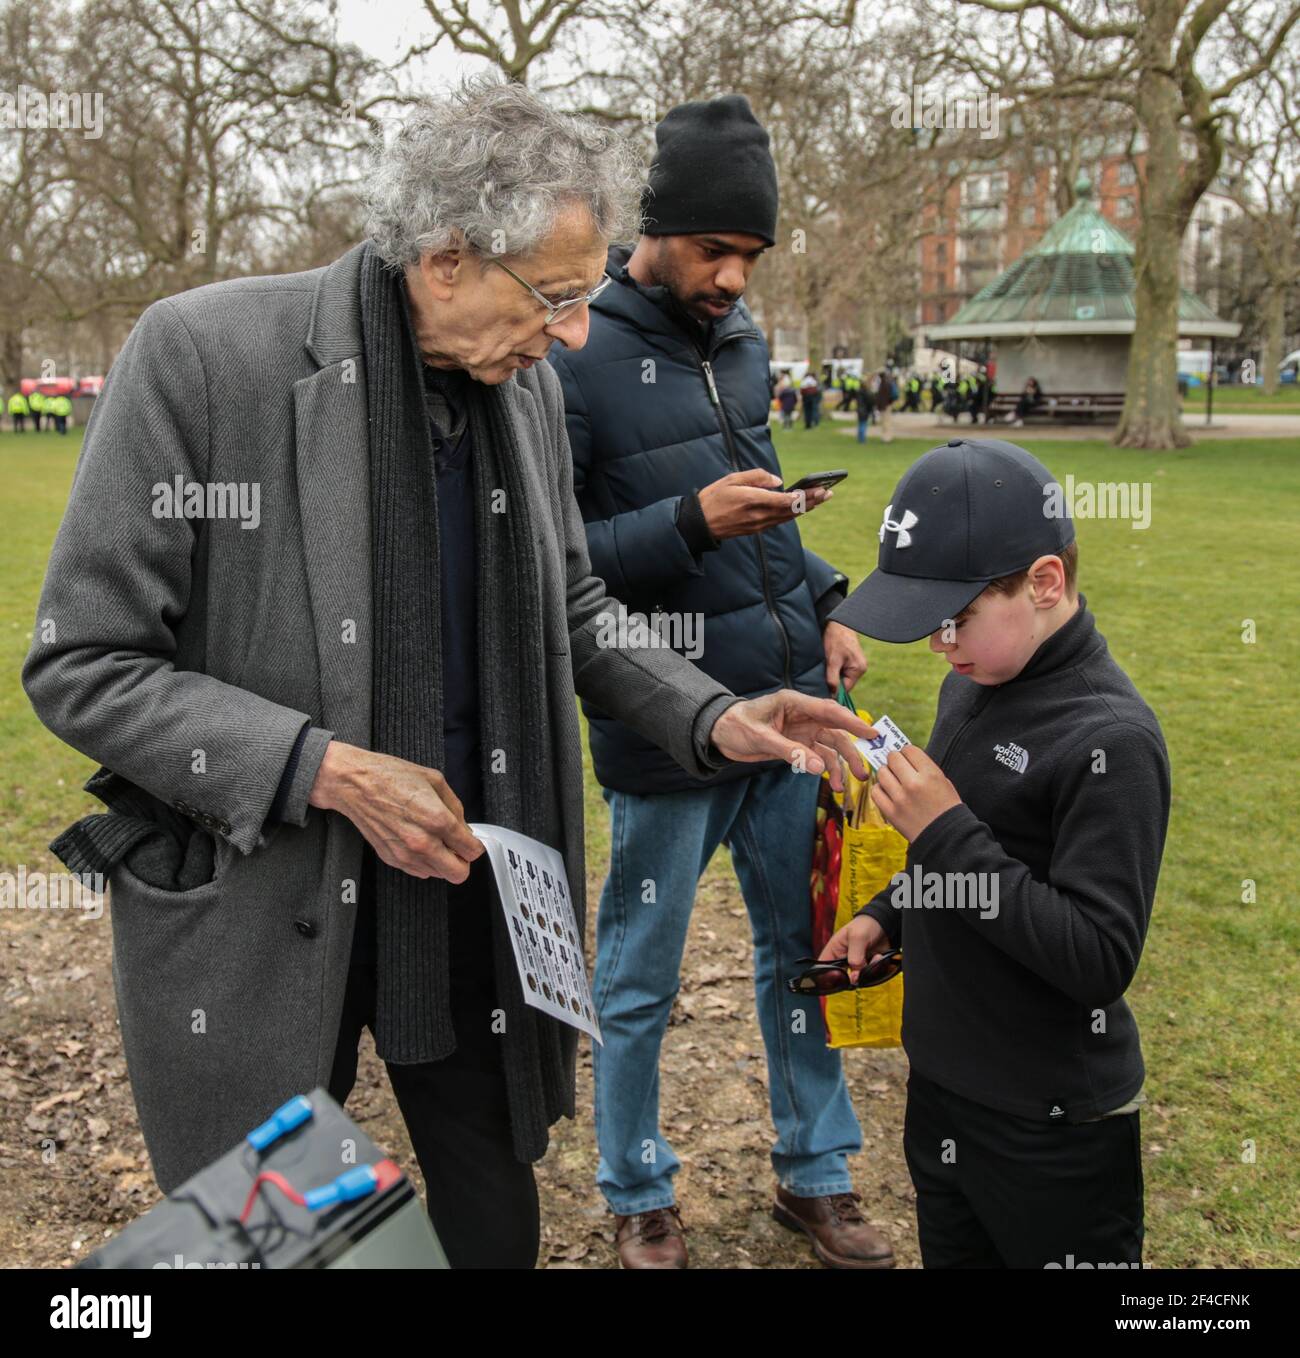 London UK 20 March 2021. Piers Corbyn English weather forecaster, businessman, activist, anti-vaxxer and conspiracy theorist arrives in Hyde Park to take part in todays anti lockdown ,anti vaccine and anti new laws to curb demonstrations ,currently been debated in parliament , giving a young fan a sticker with his name and face campaigning for London Mayor . Paul Quezada-Neiman/Alamy Live News Stock Photo